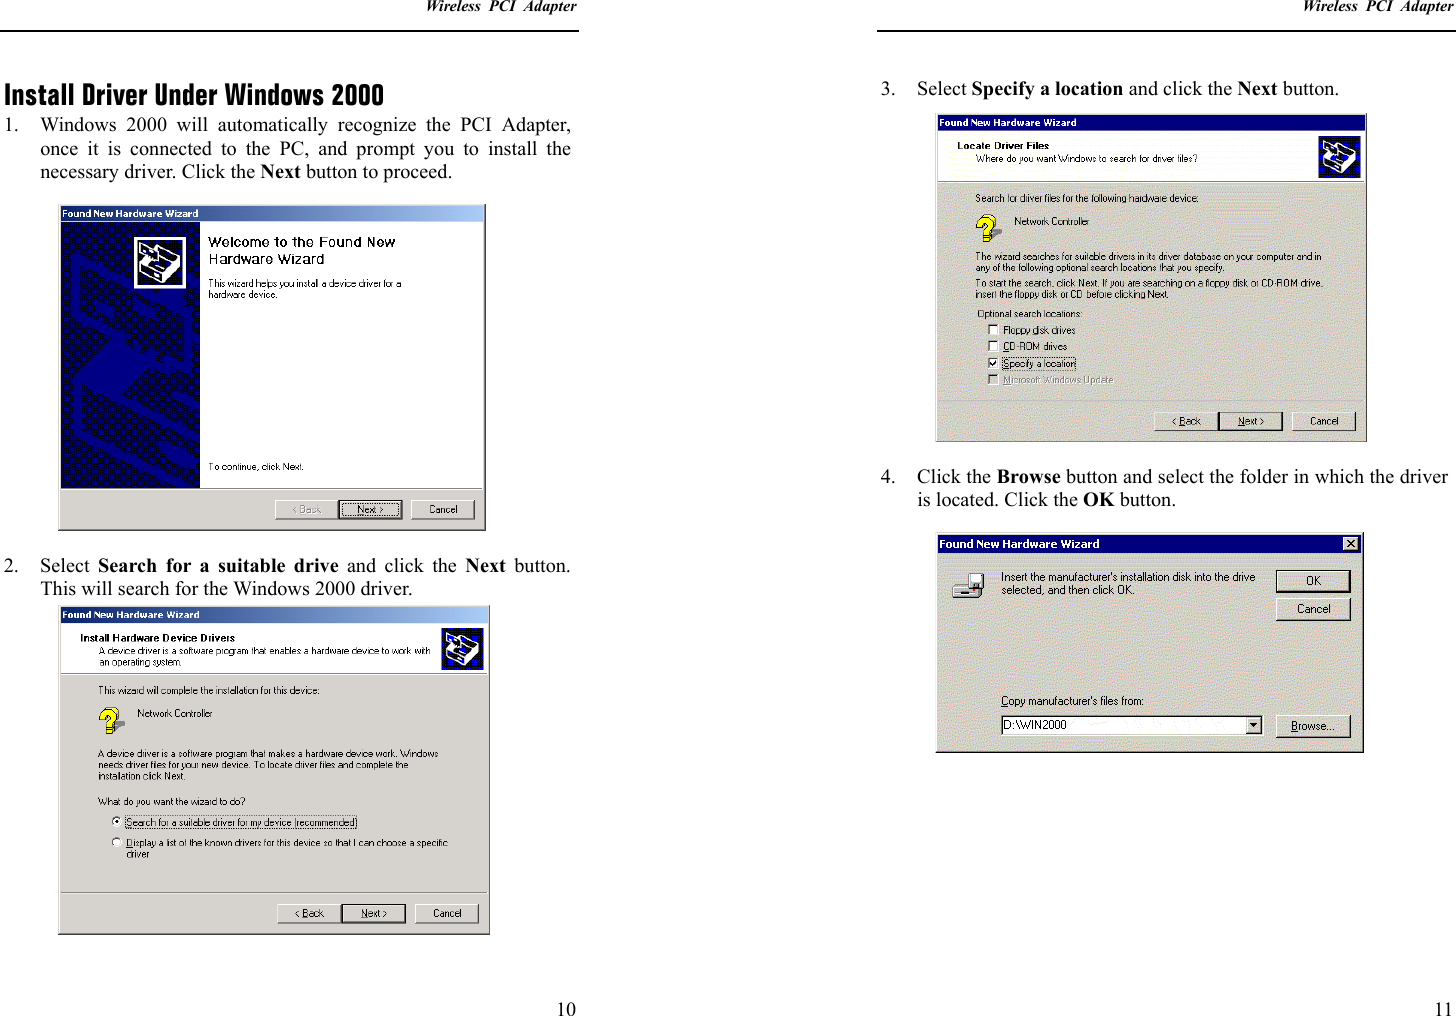    Wireless PCI Adapter  10 Install Driver Under Windows 2000 1.  Windows 2000 will automatically recognize the PCI Adapter, once it is connected to the PC, and prompt you to install the necessary driver. Click the Next button to proceed.  2. Select Search for a suitable drive and click the Next button. This will search for the Windows 2000 driver.    Wireless PCI Adapter  11 3. Select Specify a location and click the Next button.  4. Click the Browse button and select the folder in which the driver is located. Click the OK button.        